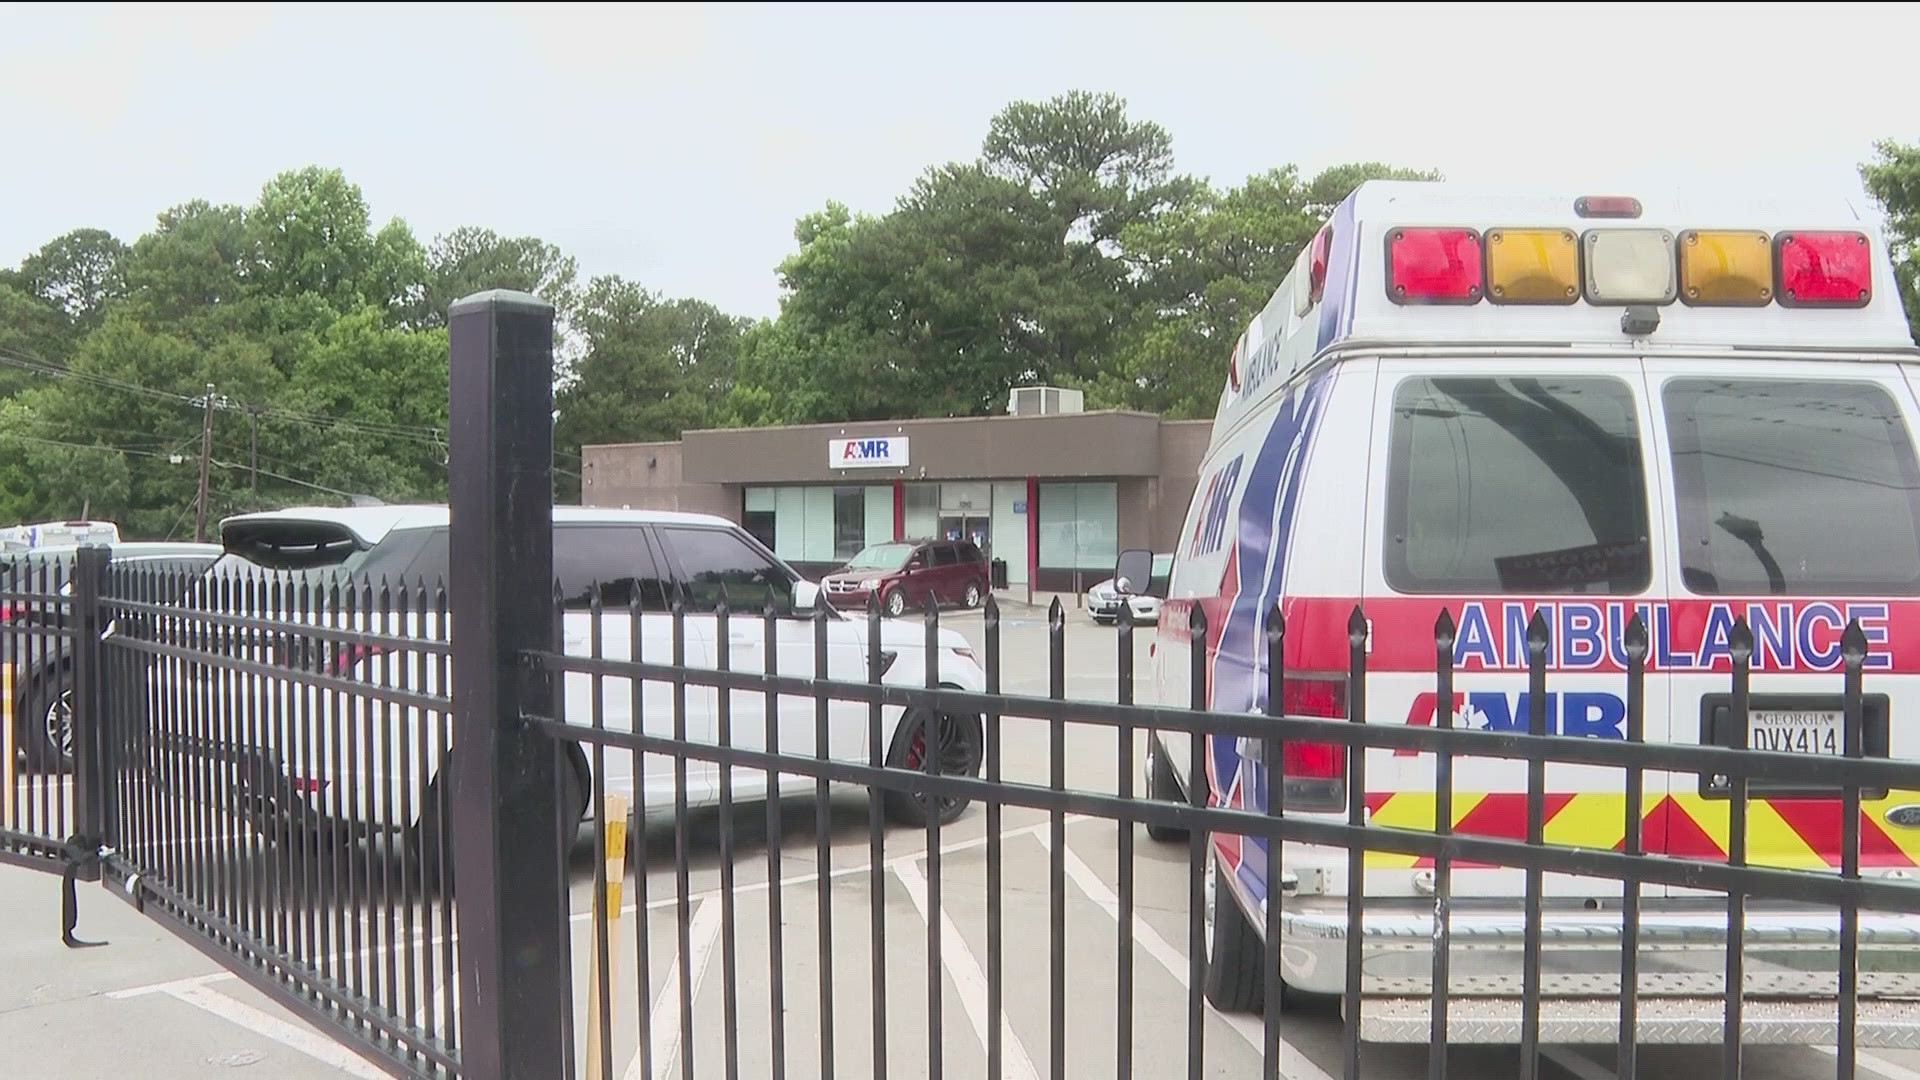 The police chief says recent response times have been so slow that some victims have taken themselves to the hospital.